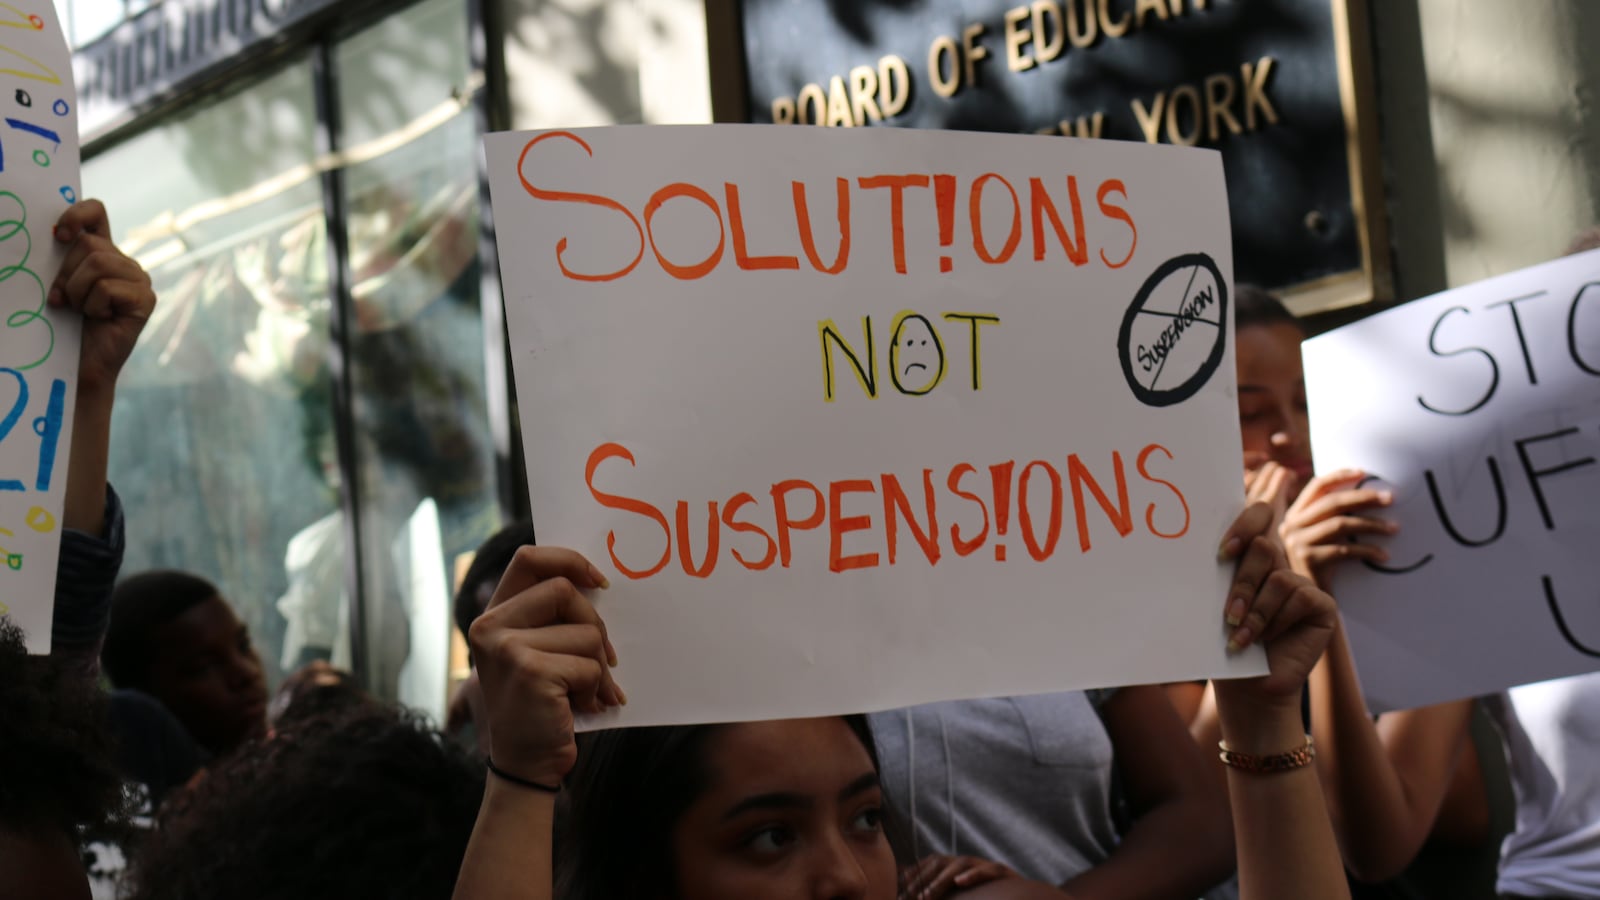 New York City advocates protested against the city's school suspension policy in August 2016.